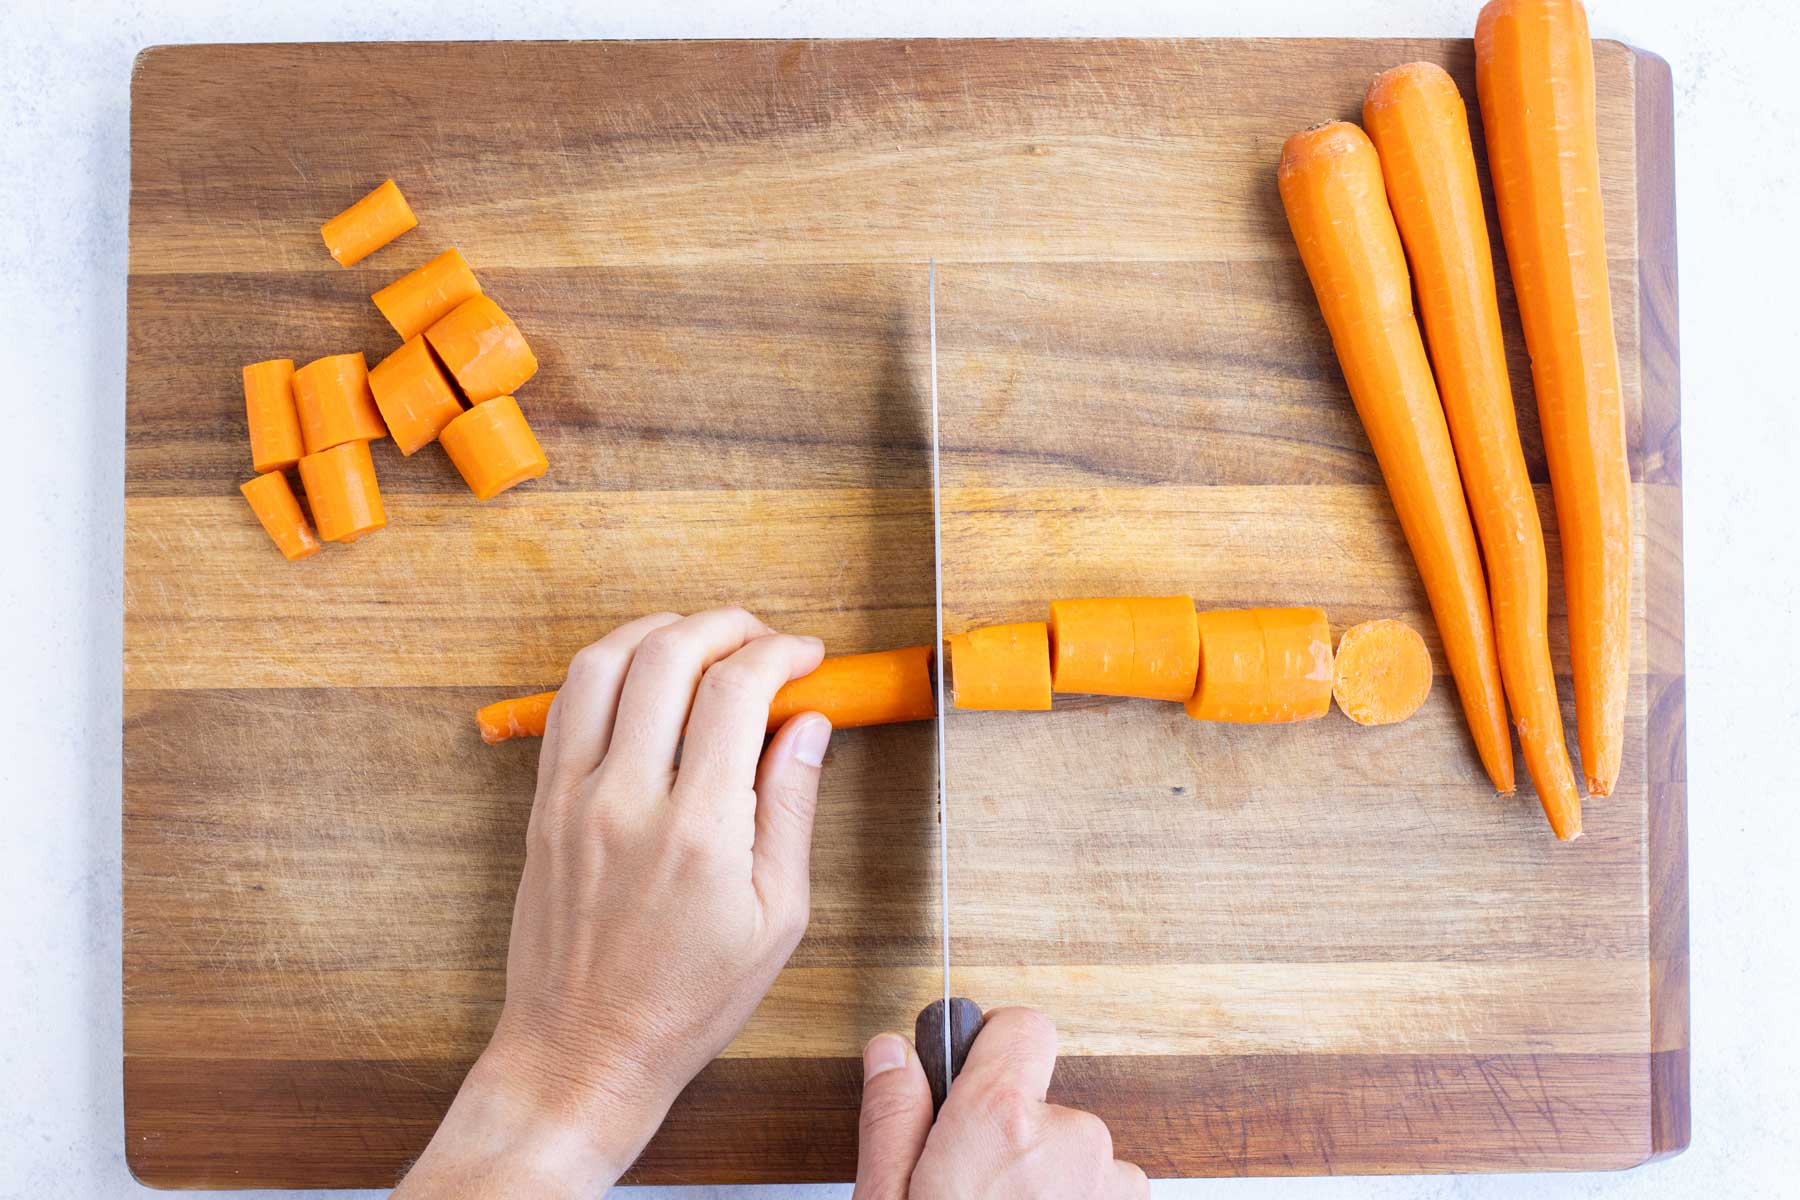 A carrot is sliced into 1-inch thick pieces.